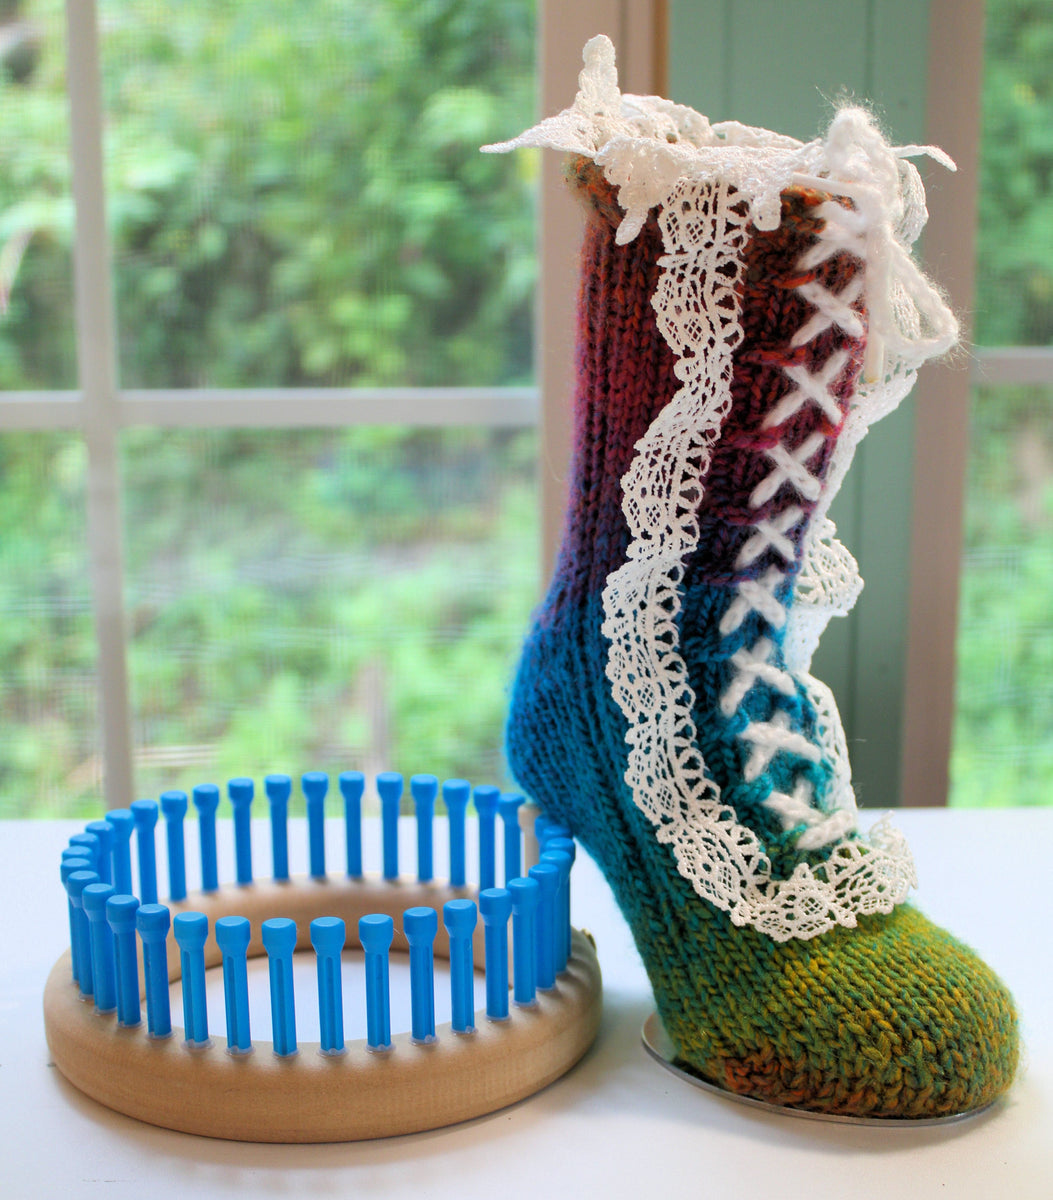 Want to make socks w/o knitting? A Review of the Sock Loom